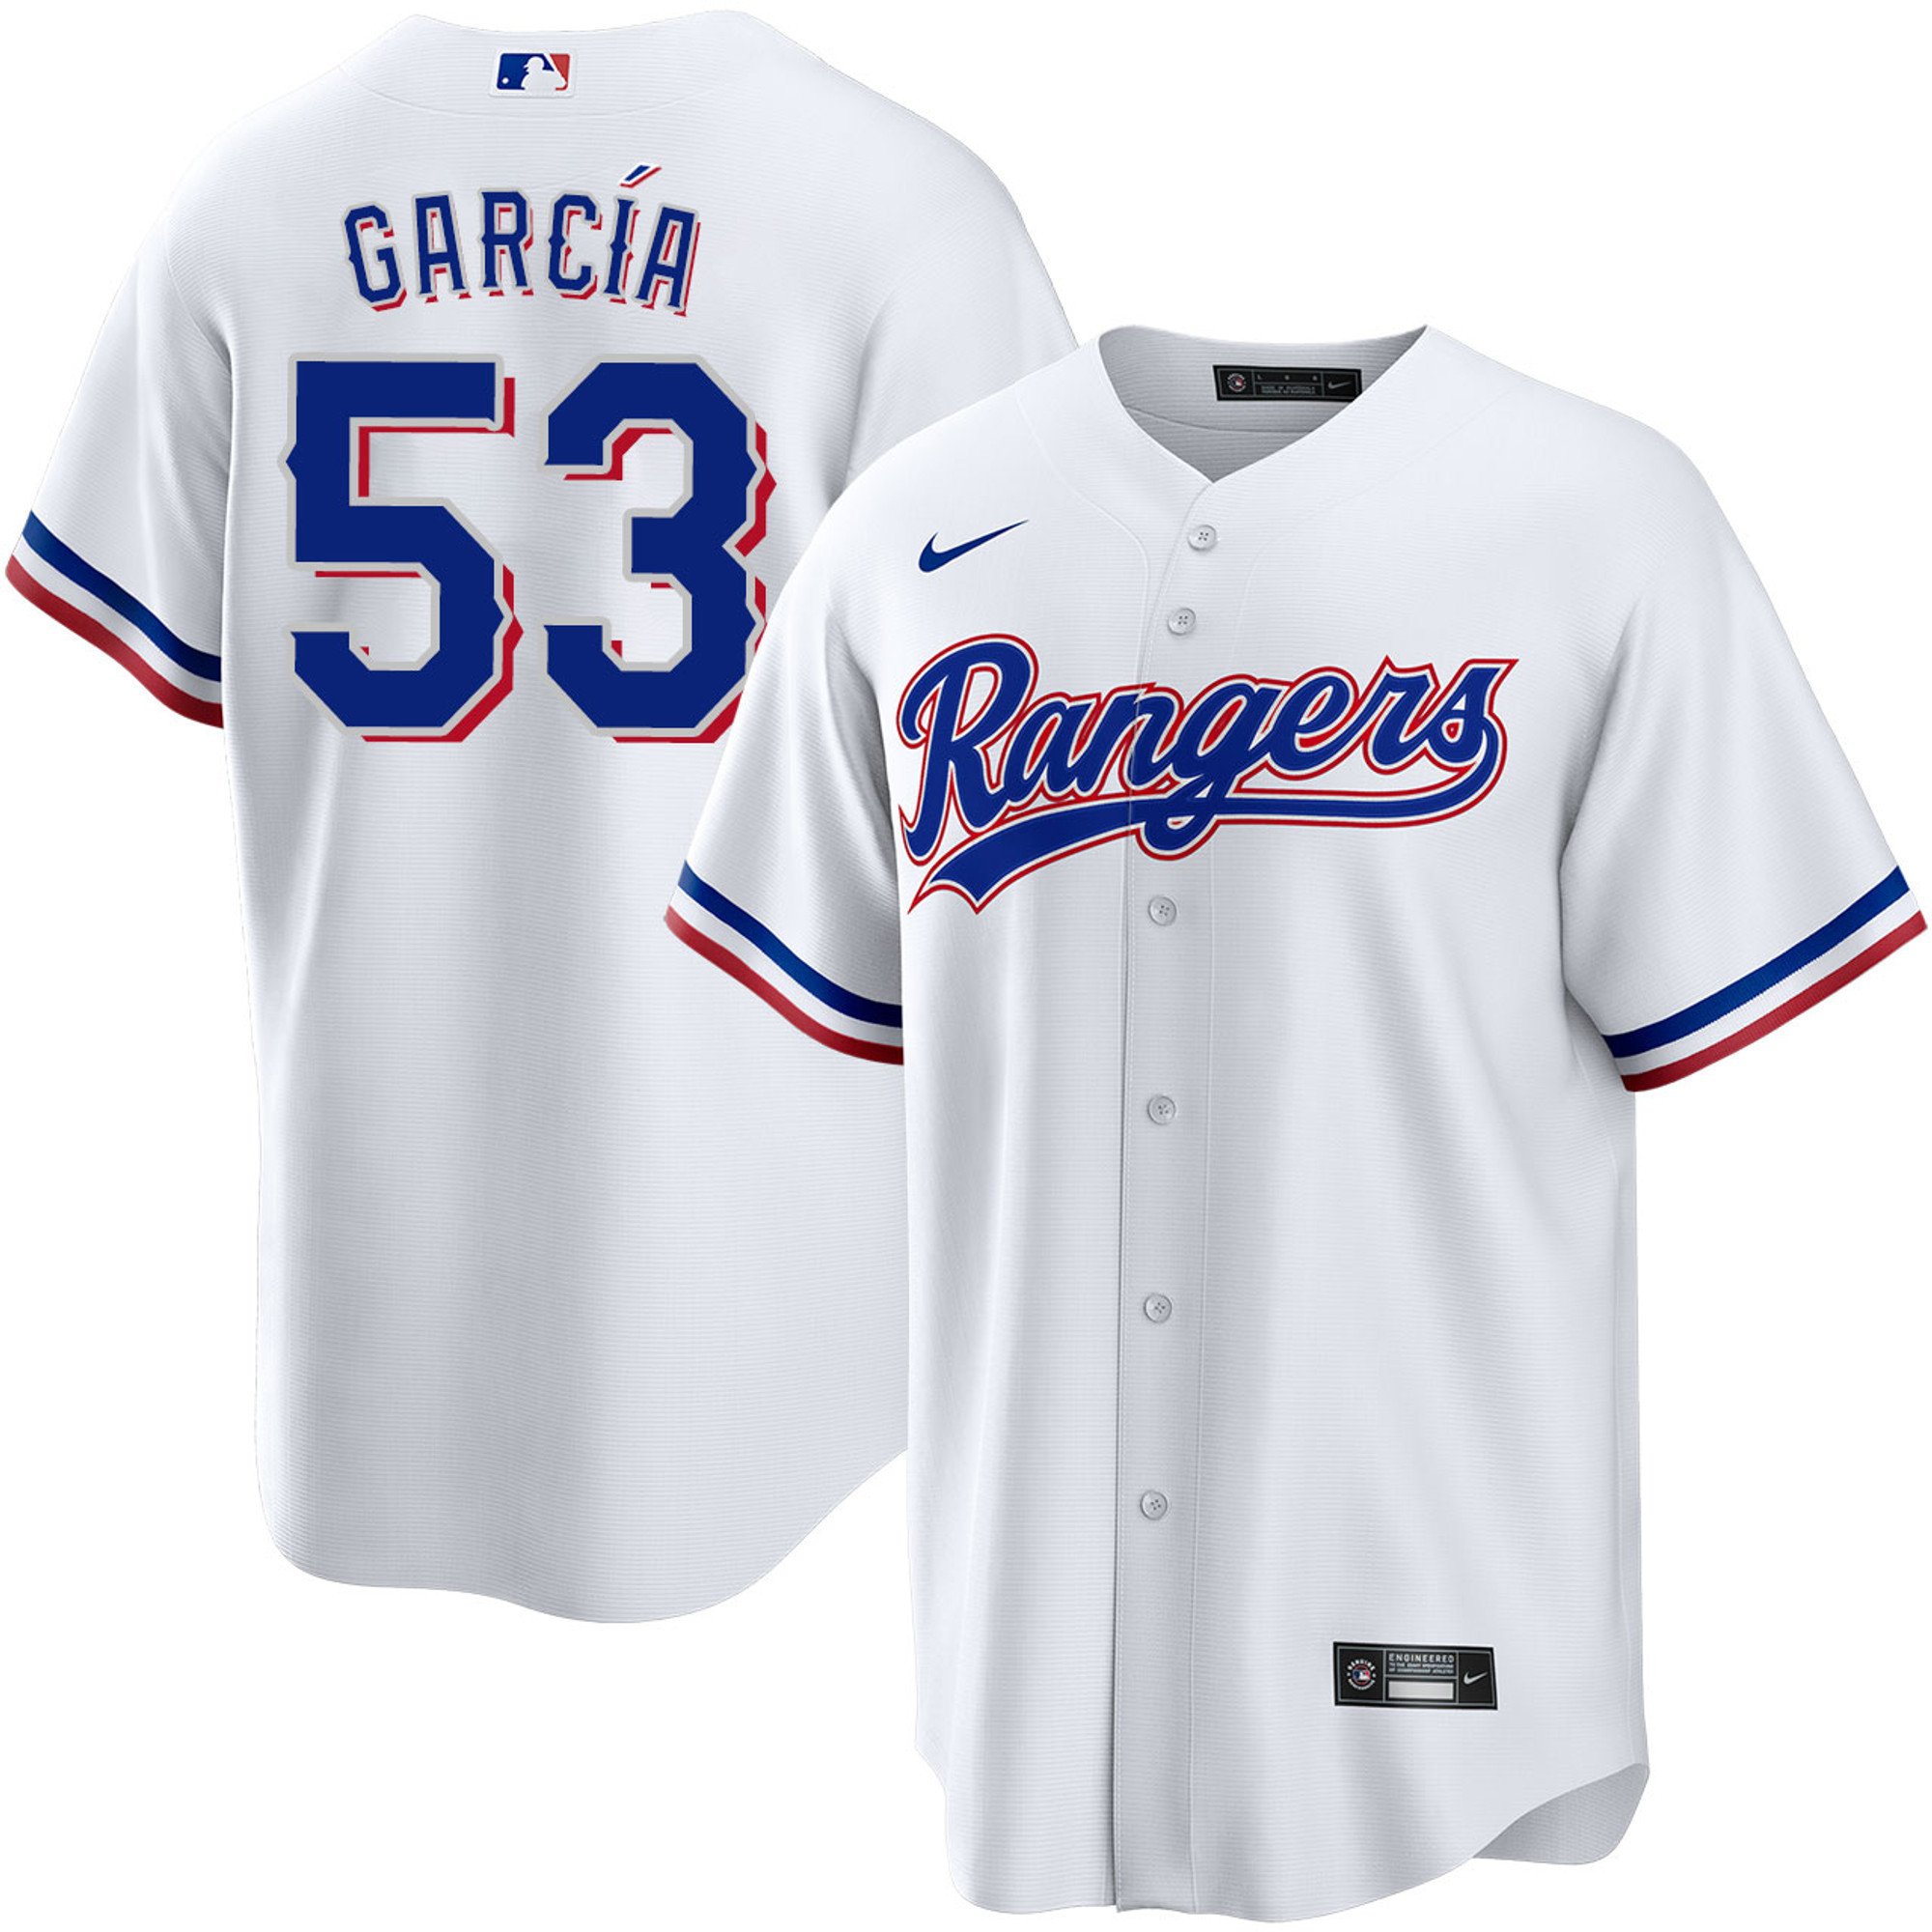 Texas Rangers Mexican Custom Jersey V3 - All Stitched - Vgear